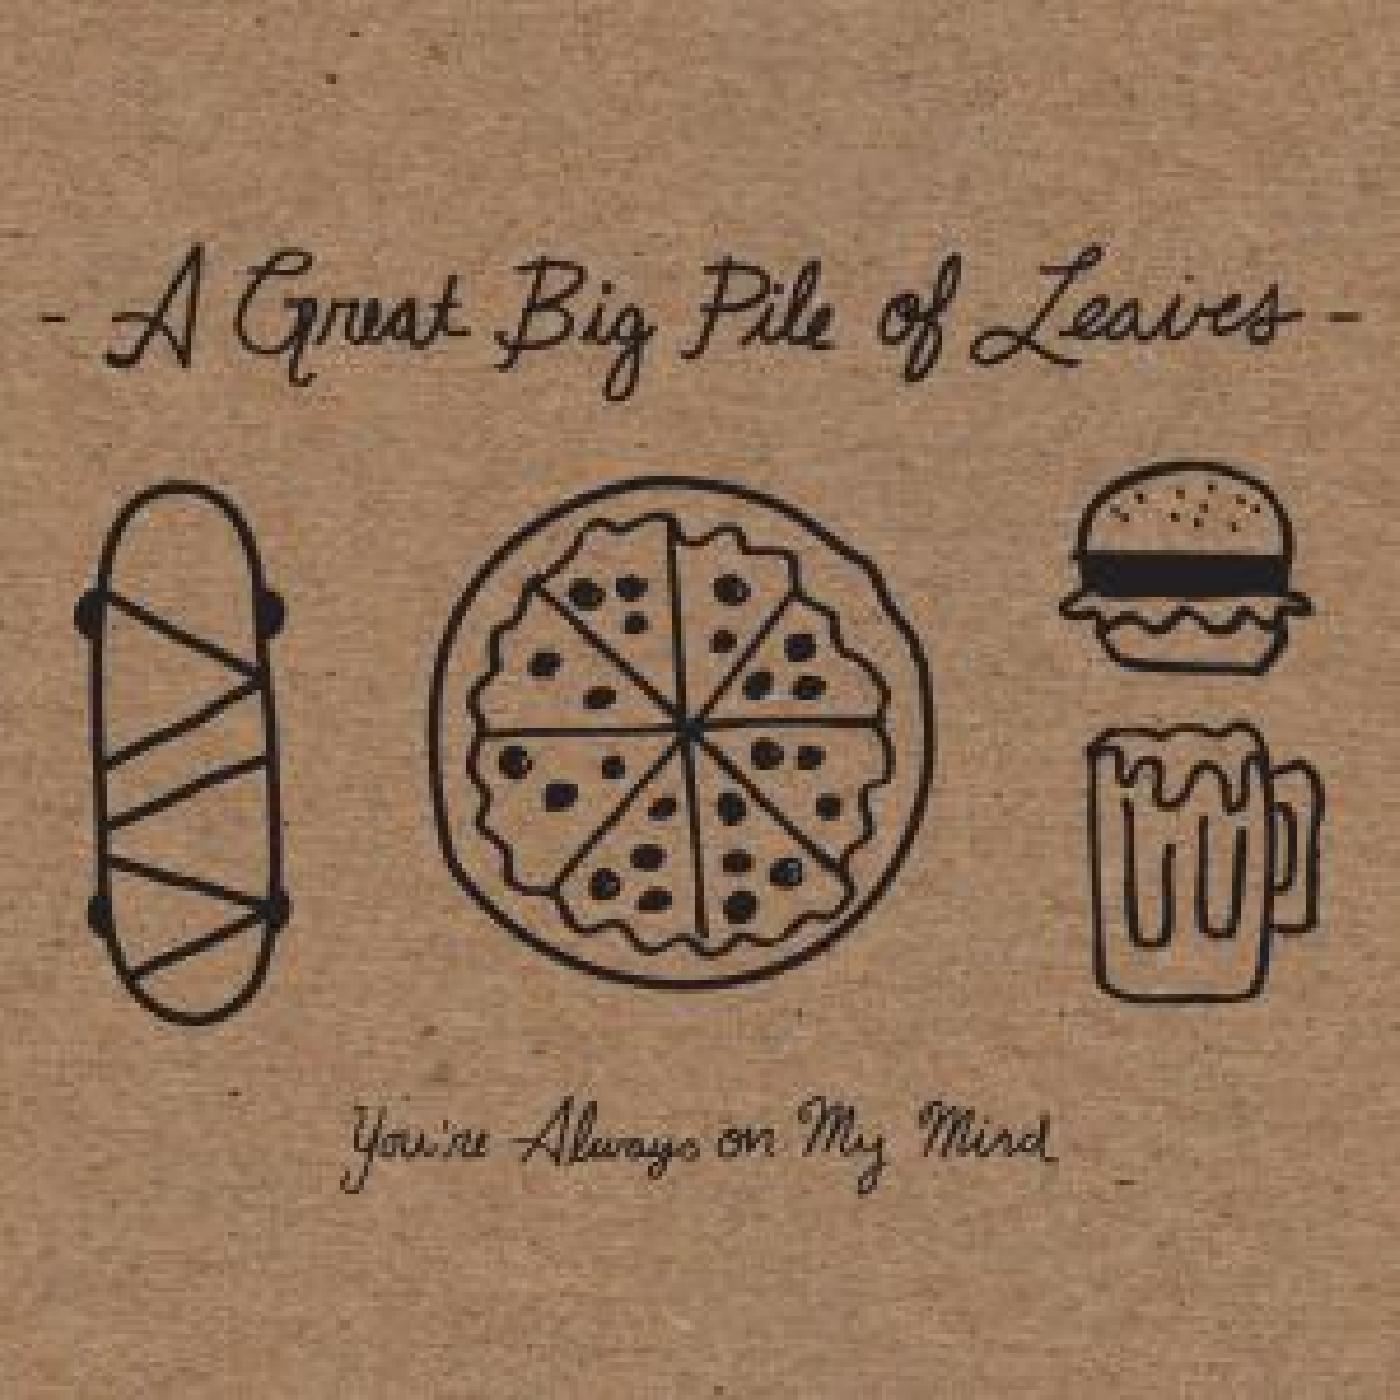 A Great Big Pile Of Leaves - You'Re Always On My Mind (Mint Splatter Vinyl)